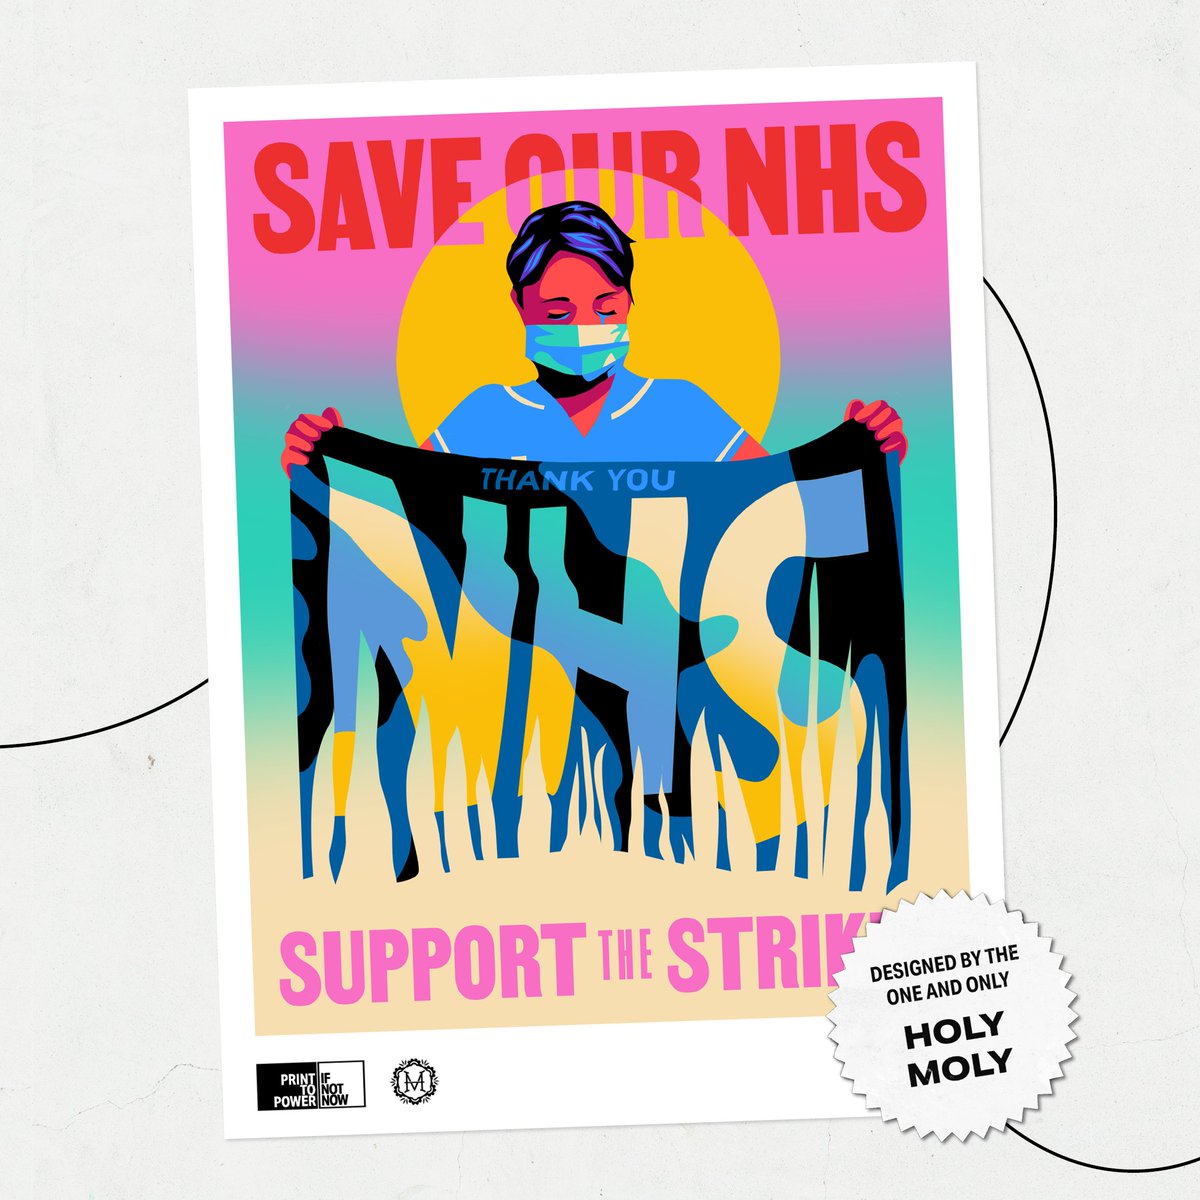 As part of the campaign, we've commissioned a group of four creatives: @MarylouFaure, @moly_uk , @darren_cullen & @ifnotnowdigital's own Daniel Jennings. High quality A2 & A3 posters are available to order for delivery from our shop, with all profits to the @theRCN Strike Fund.